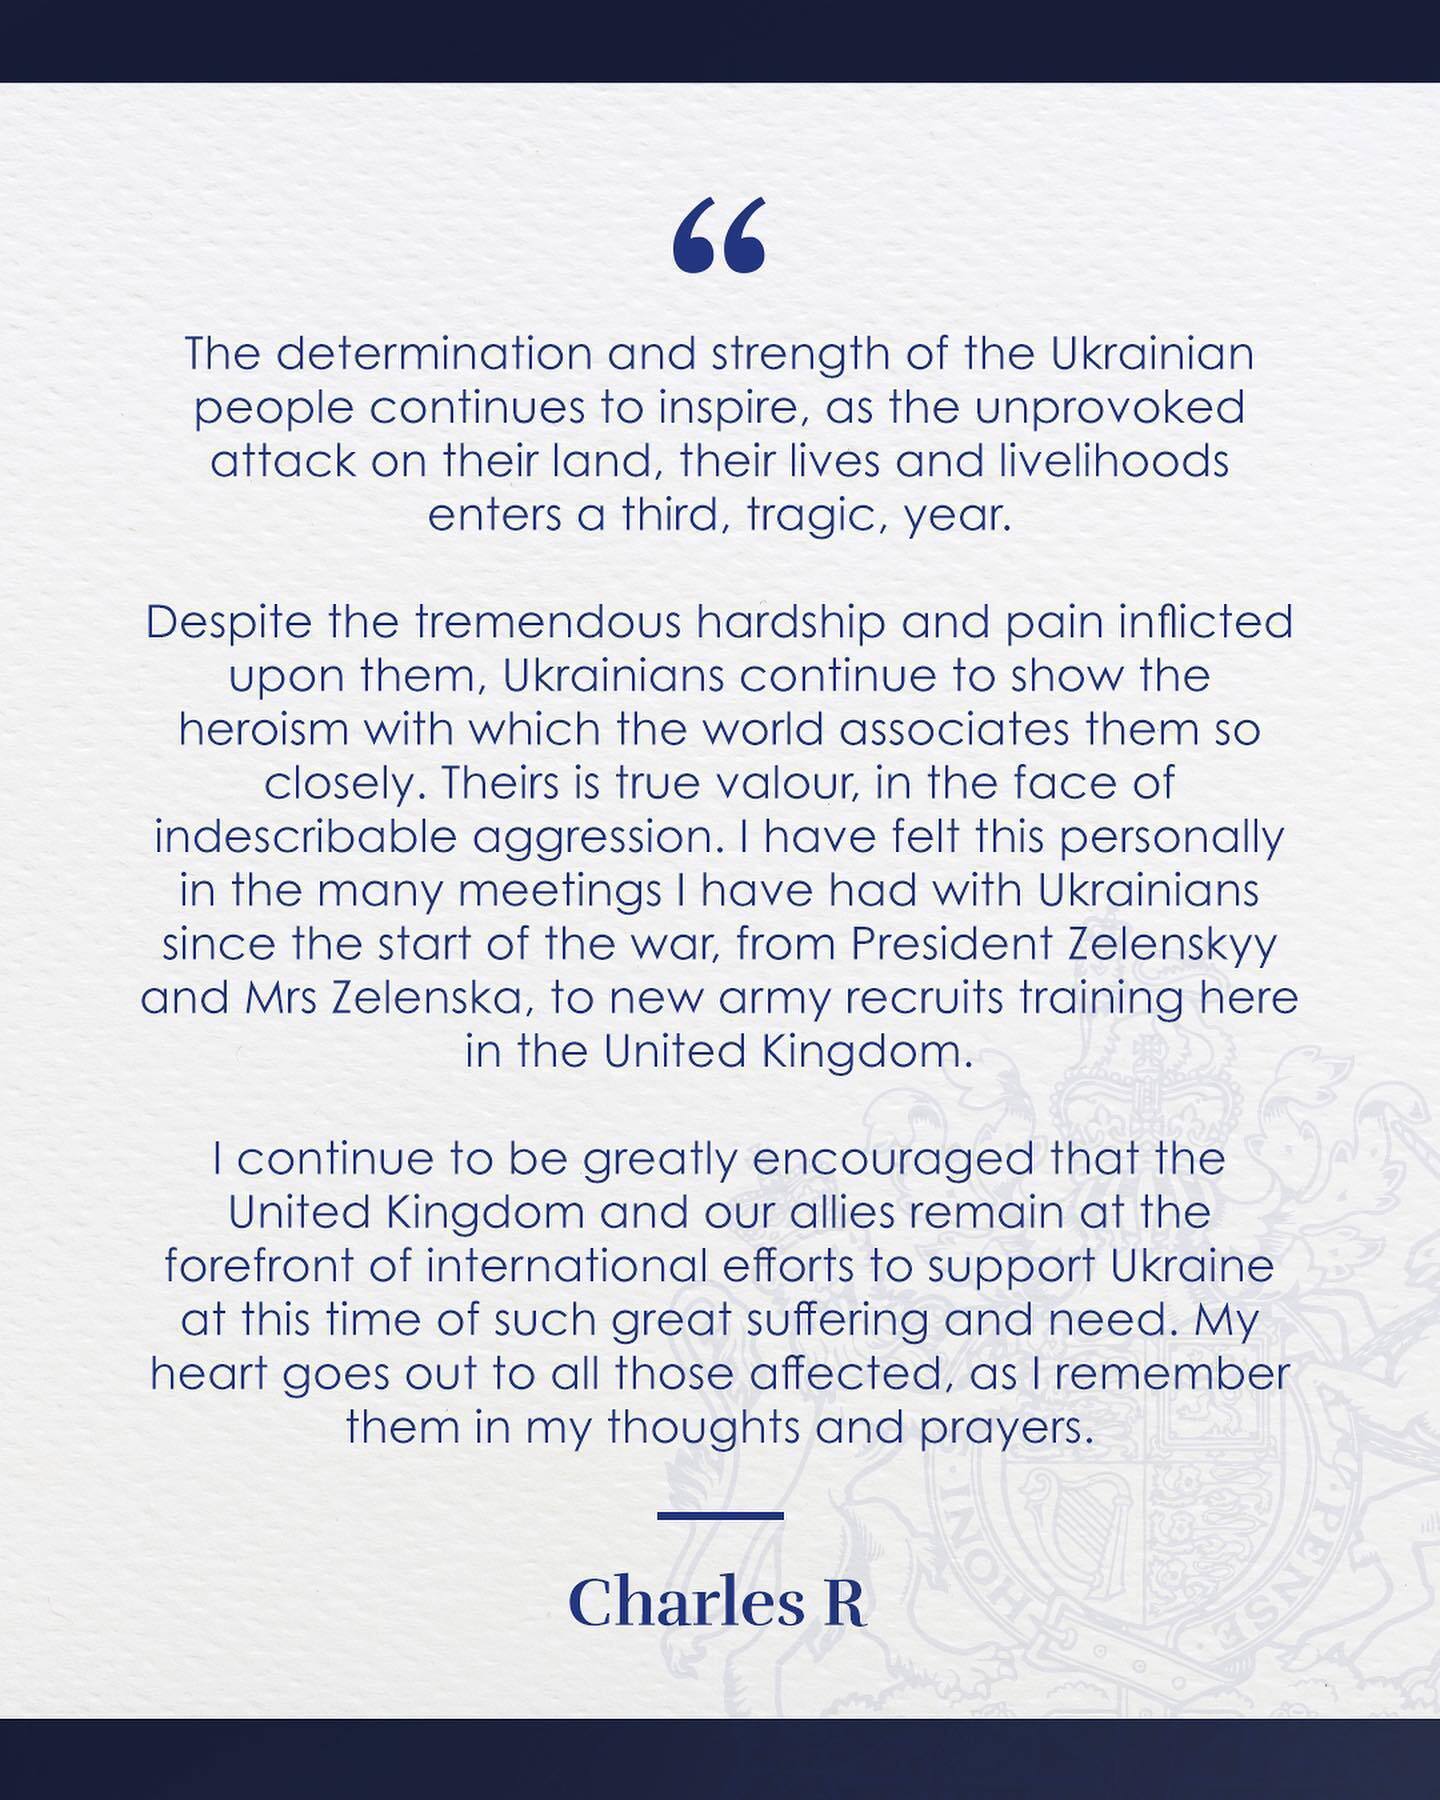 King Charles III addressed Ukrainians on the second anniversary of the Great War: this is true valor in the face of unspeakable aggression